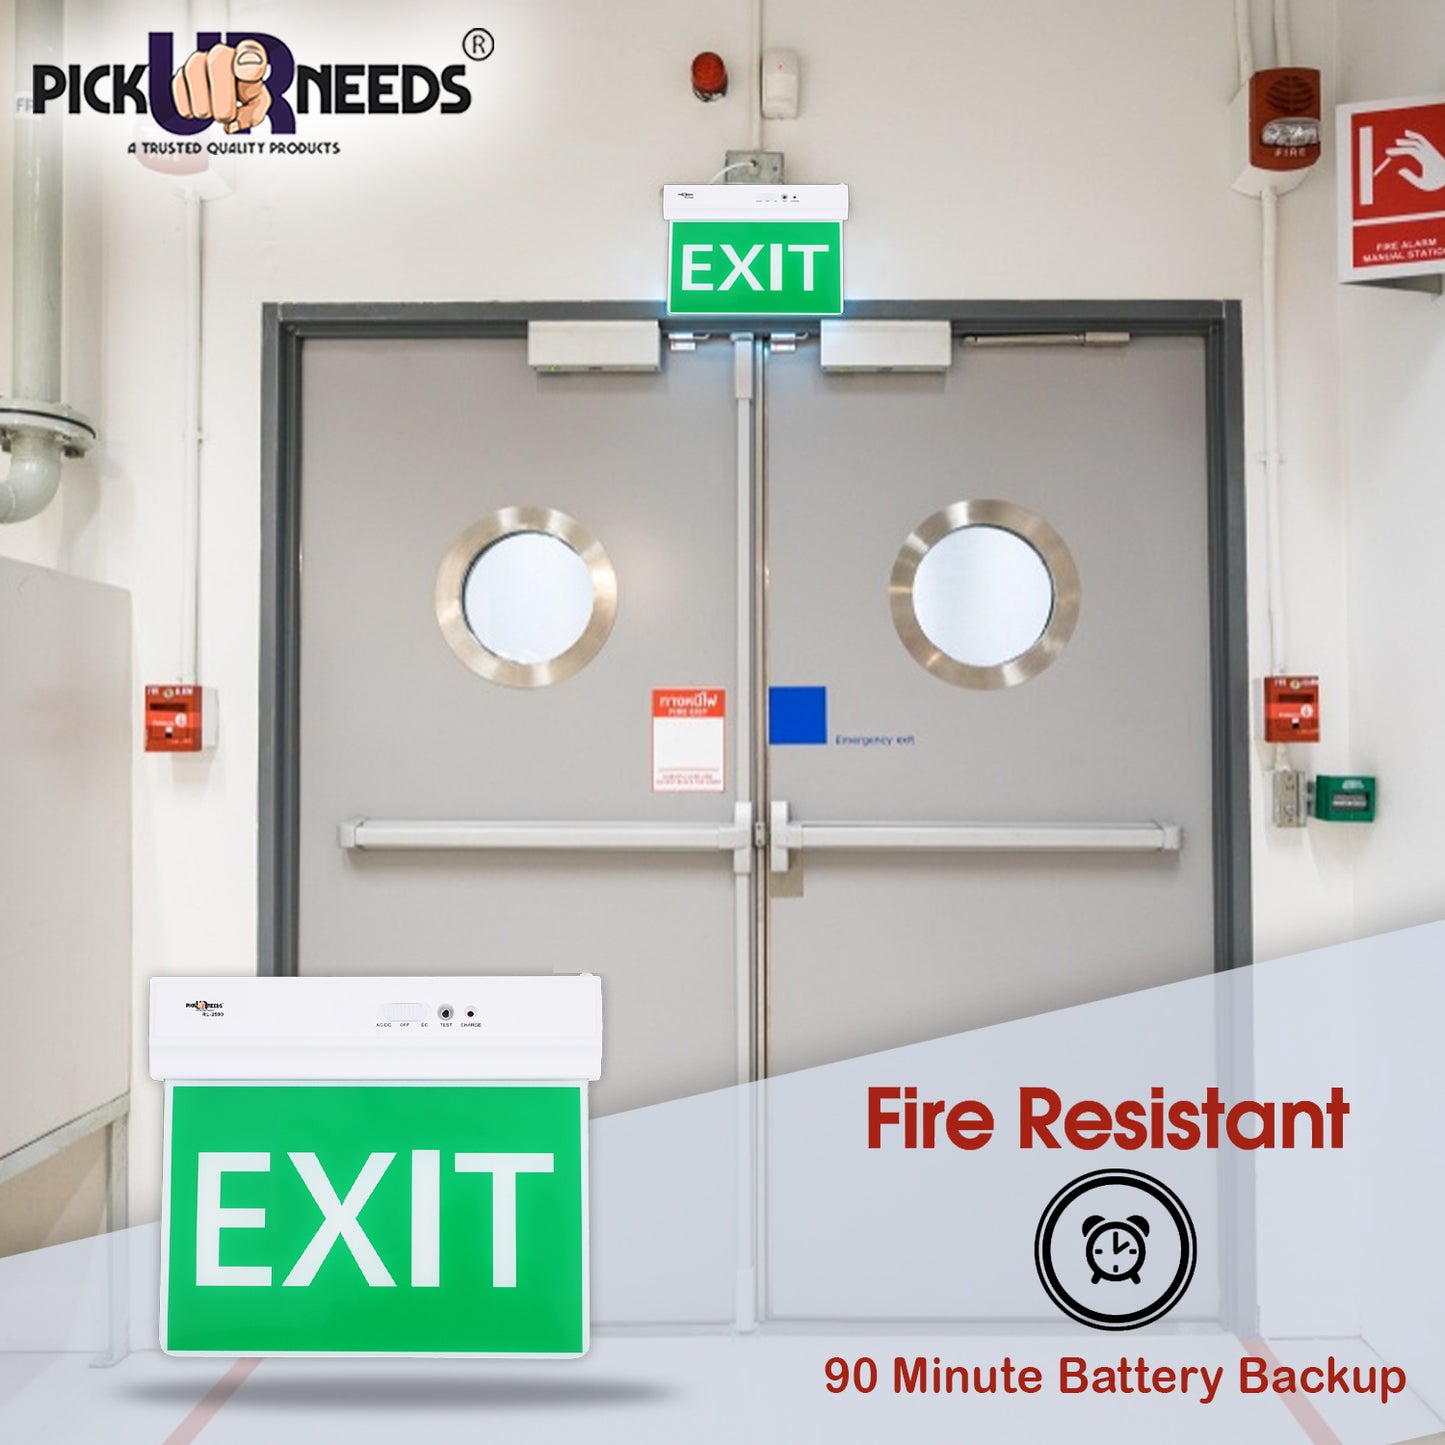 Pick Ur Needs Rechargeable Ceiling Mount Emergency LED Exit Indicate Light Sign With Lithium Battery